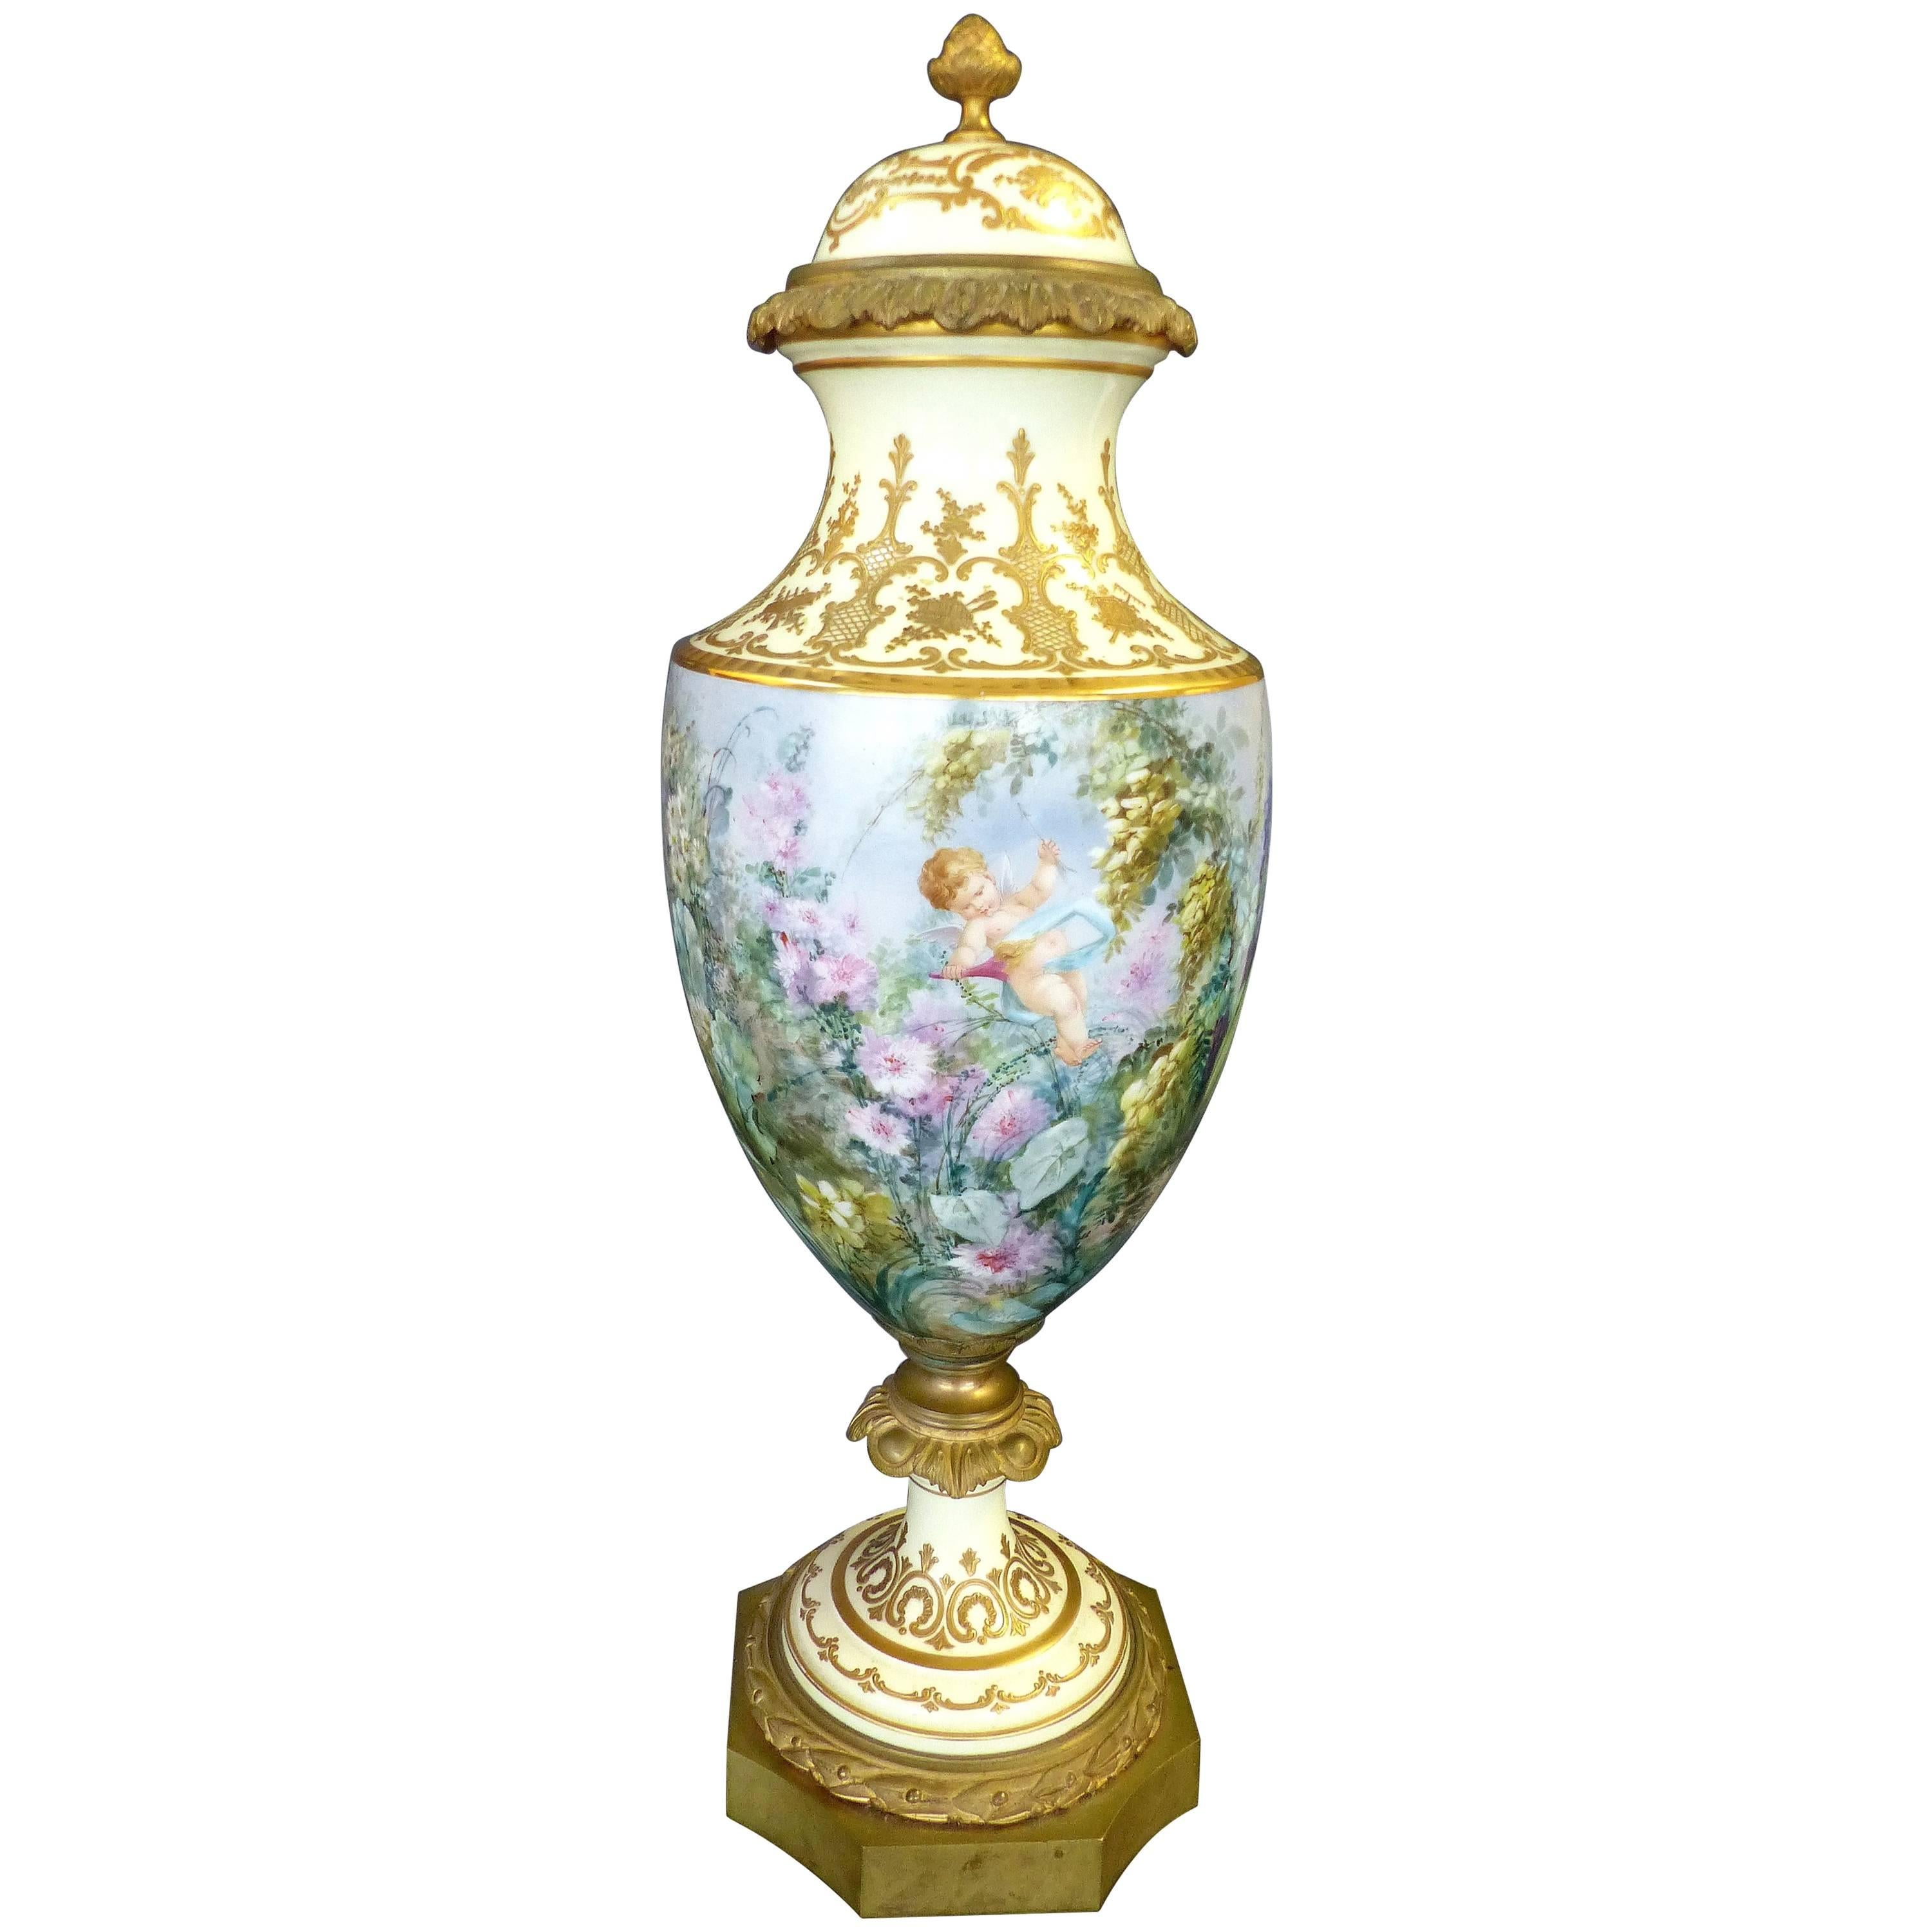 19th Century Hand-Painted Sevres Covered Urn Mounted in Gilt Bronze, Signed